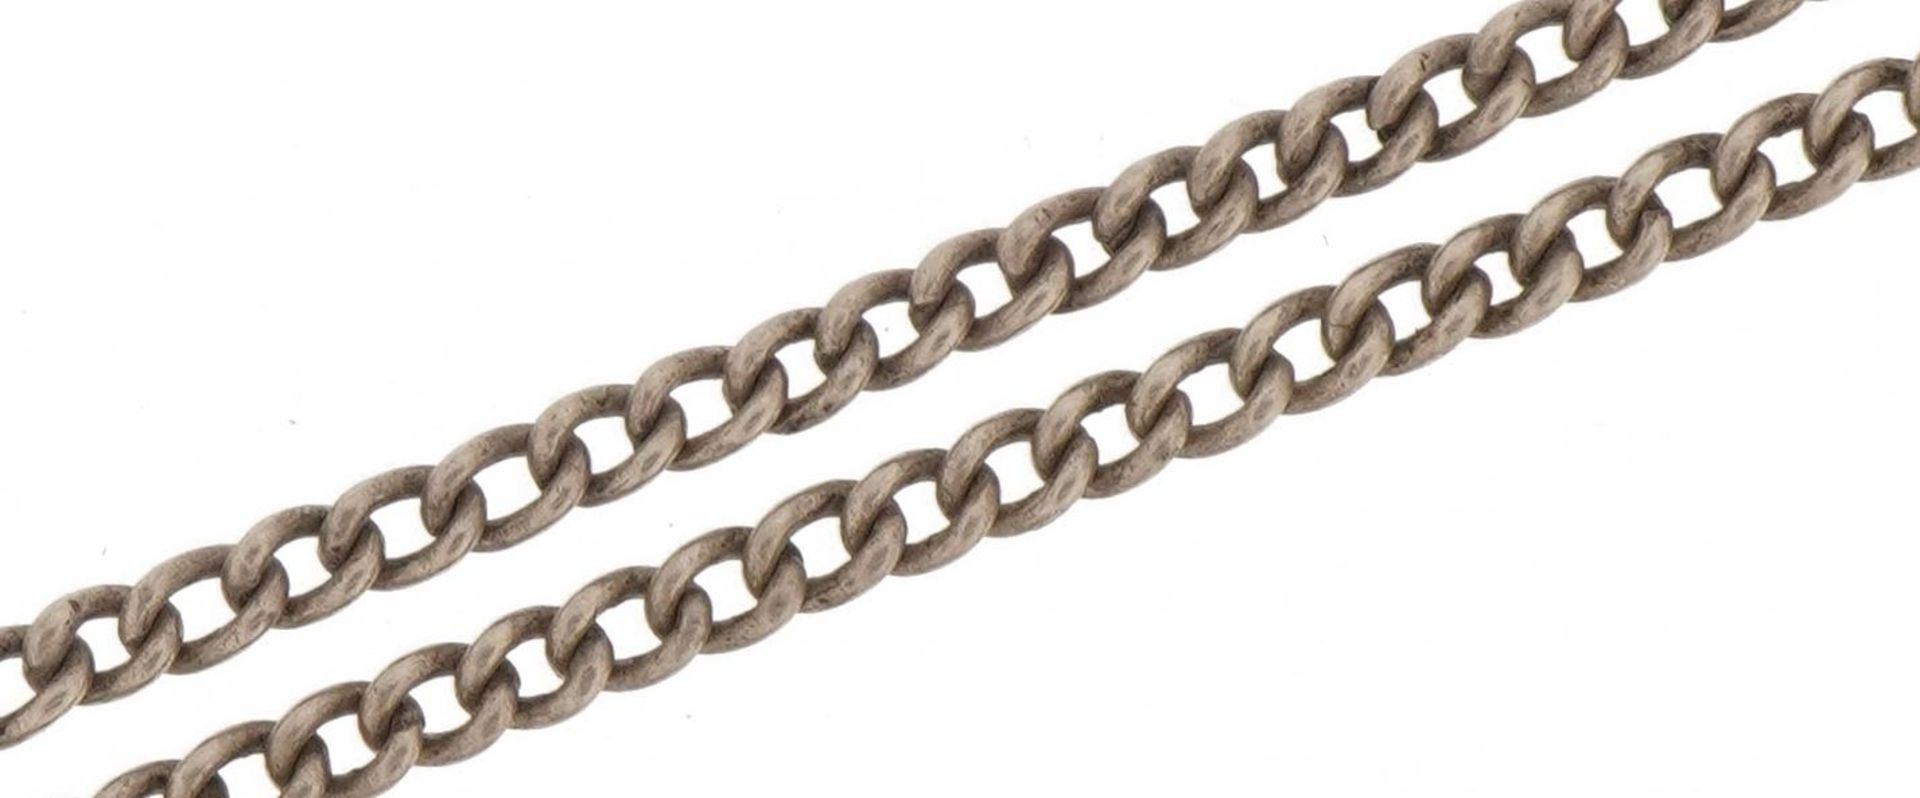 Silver Longuard watch chain with dog clip clasp, 75cm in length, 19.8g : For further information